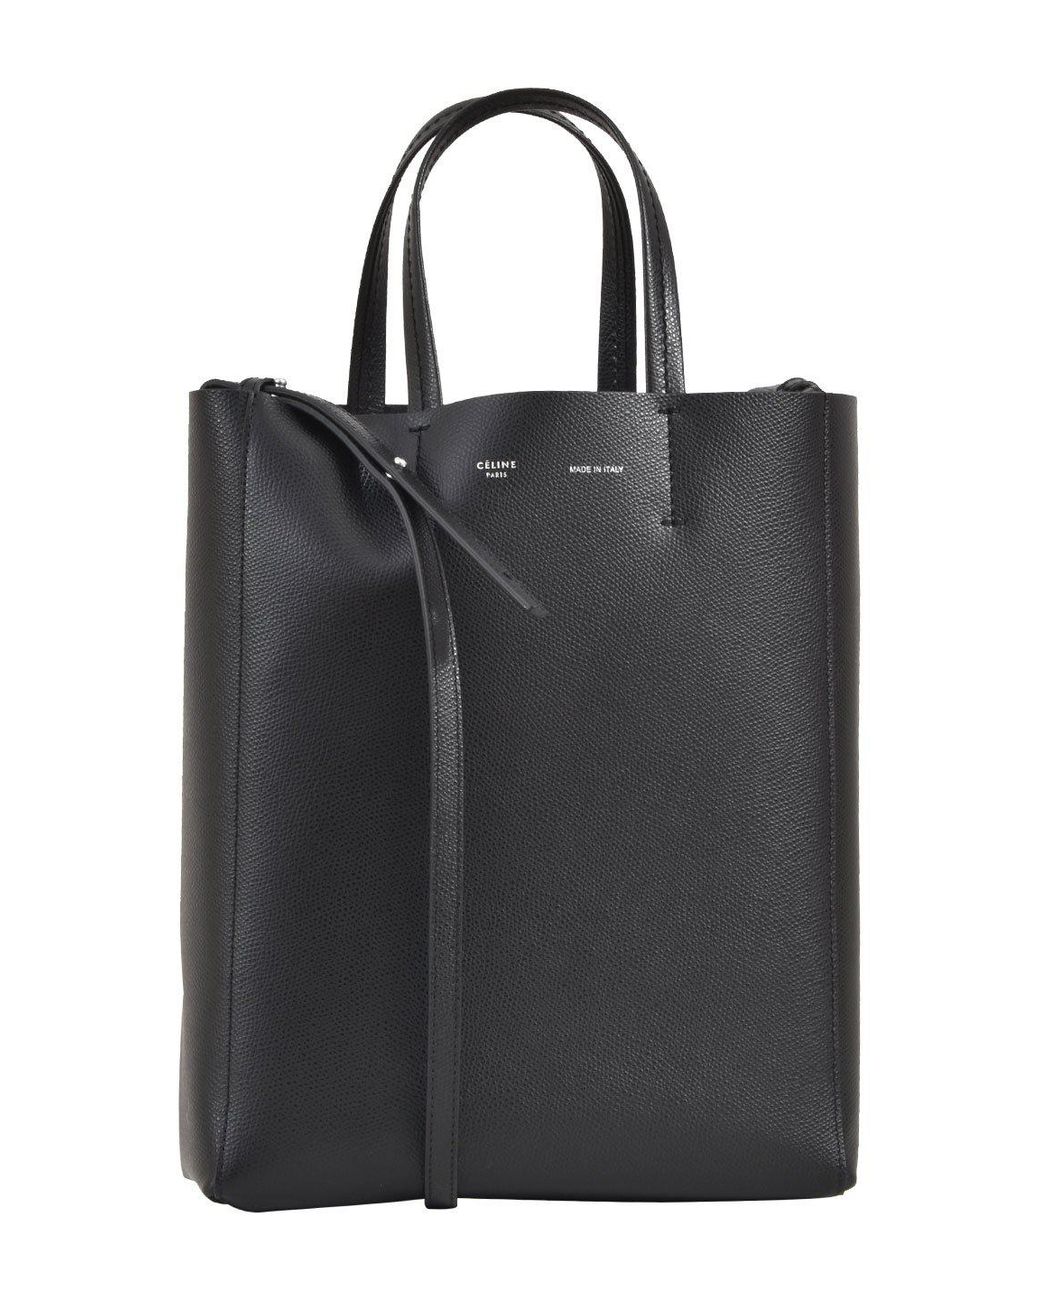 Celine Small Cabas Leather Tote Bag in Black